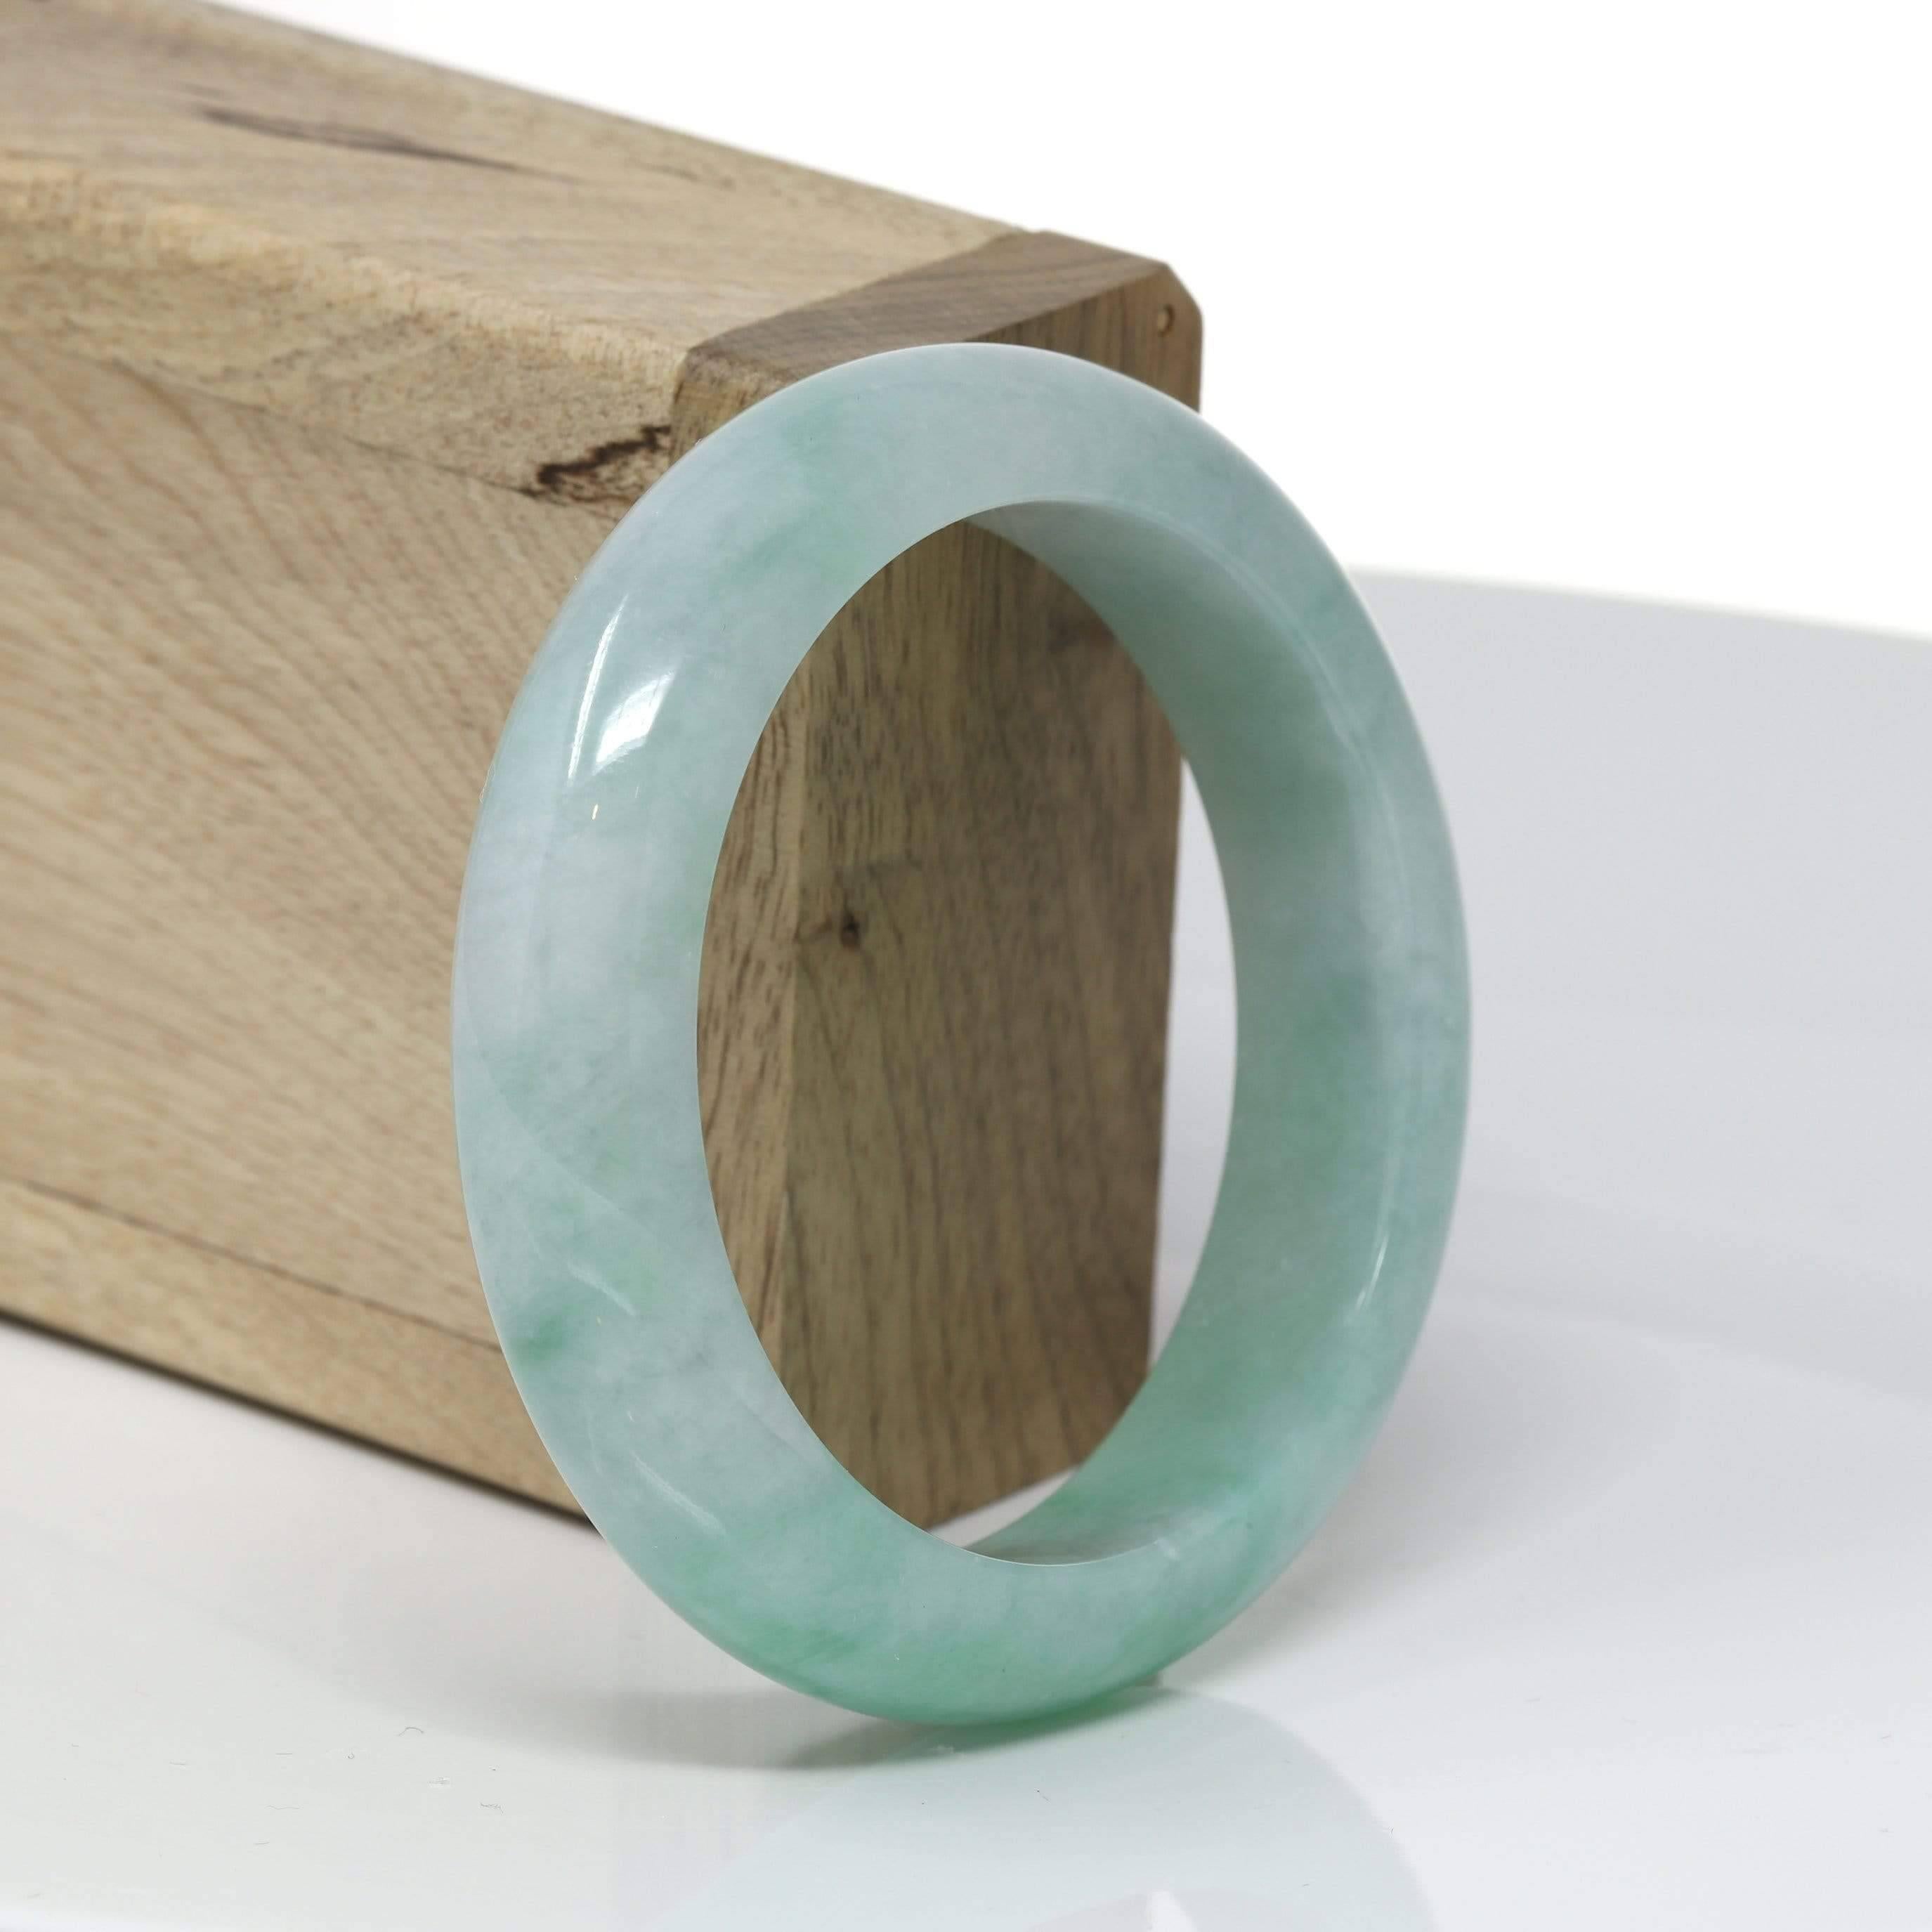 * DETAILS--- This natural high-quality Burmese Jadeite bangle is a lovely beautiful apple green all throughout, as seen in the pictures. The texture and color is very even throughout the bangle, and this bangle is very translucent under the light.